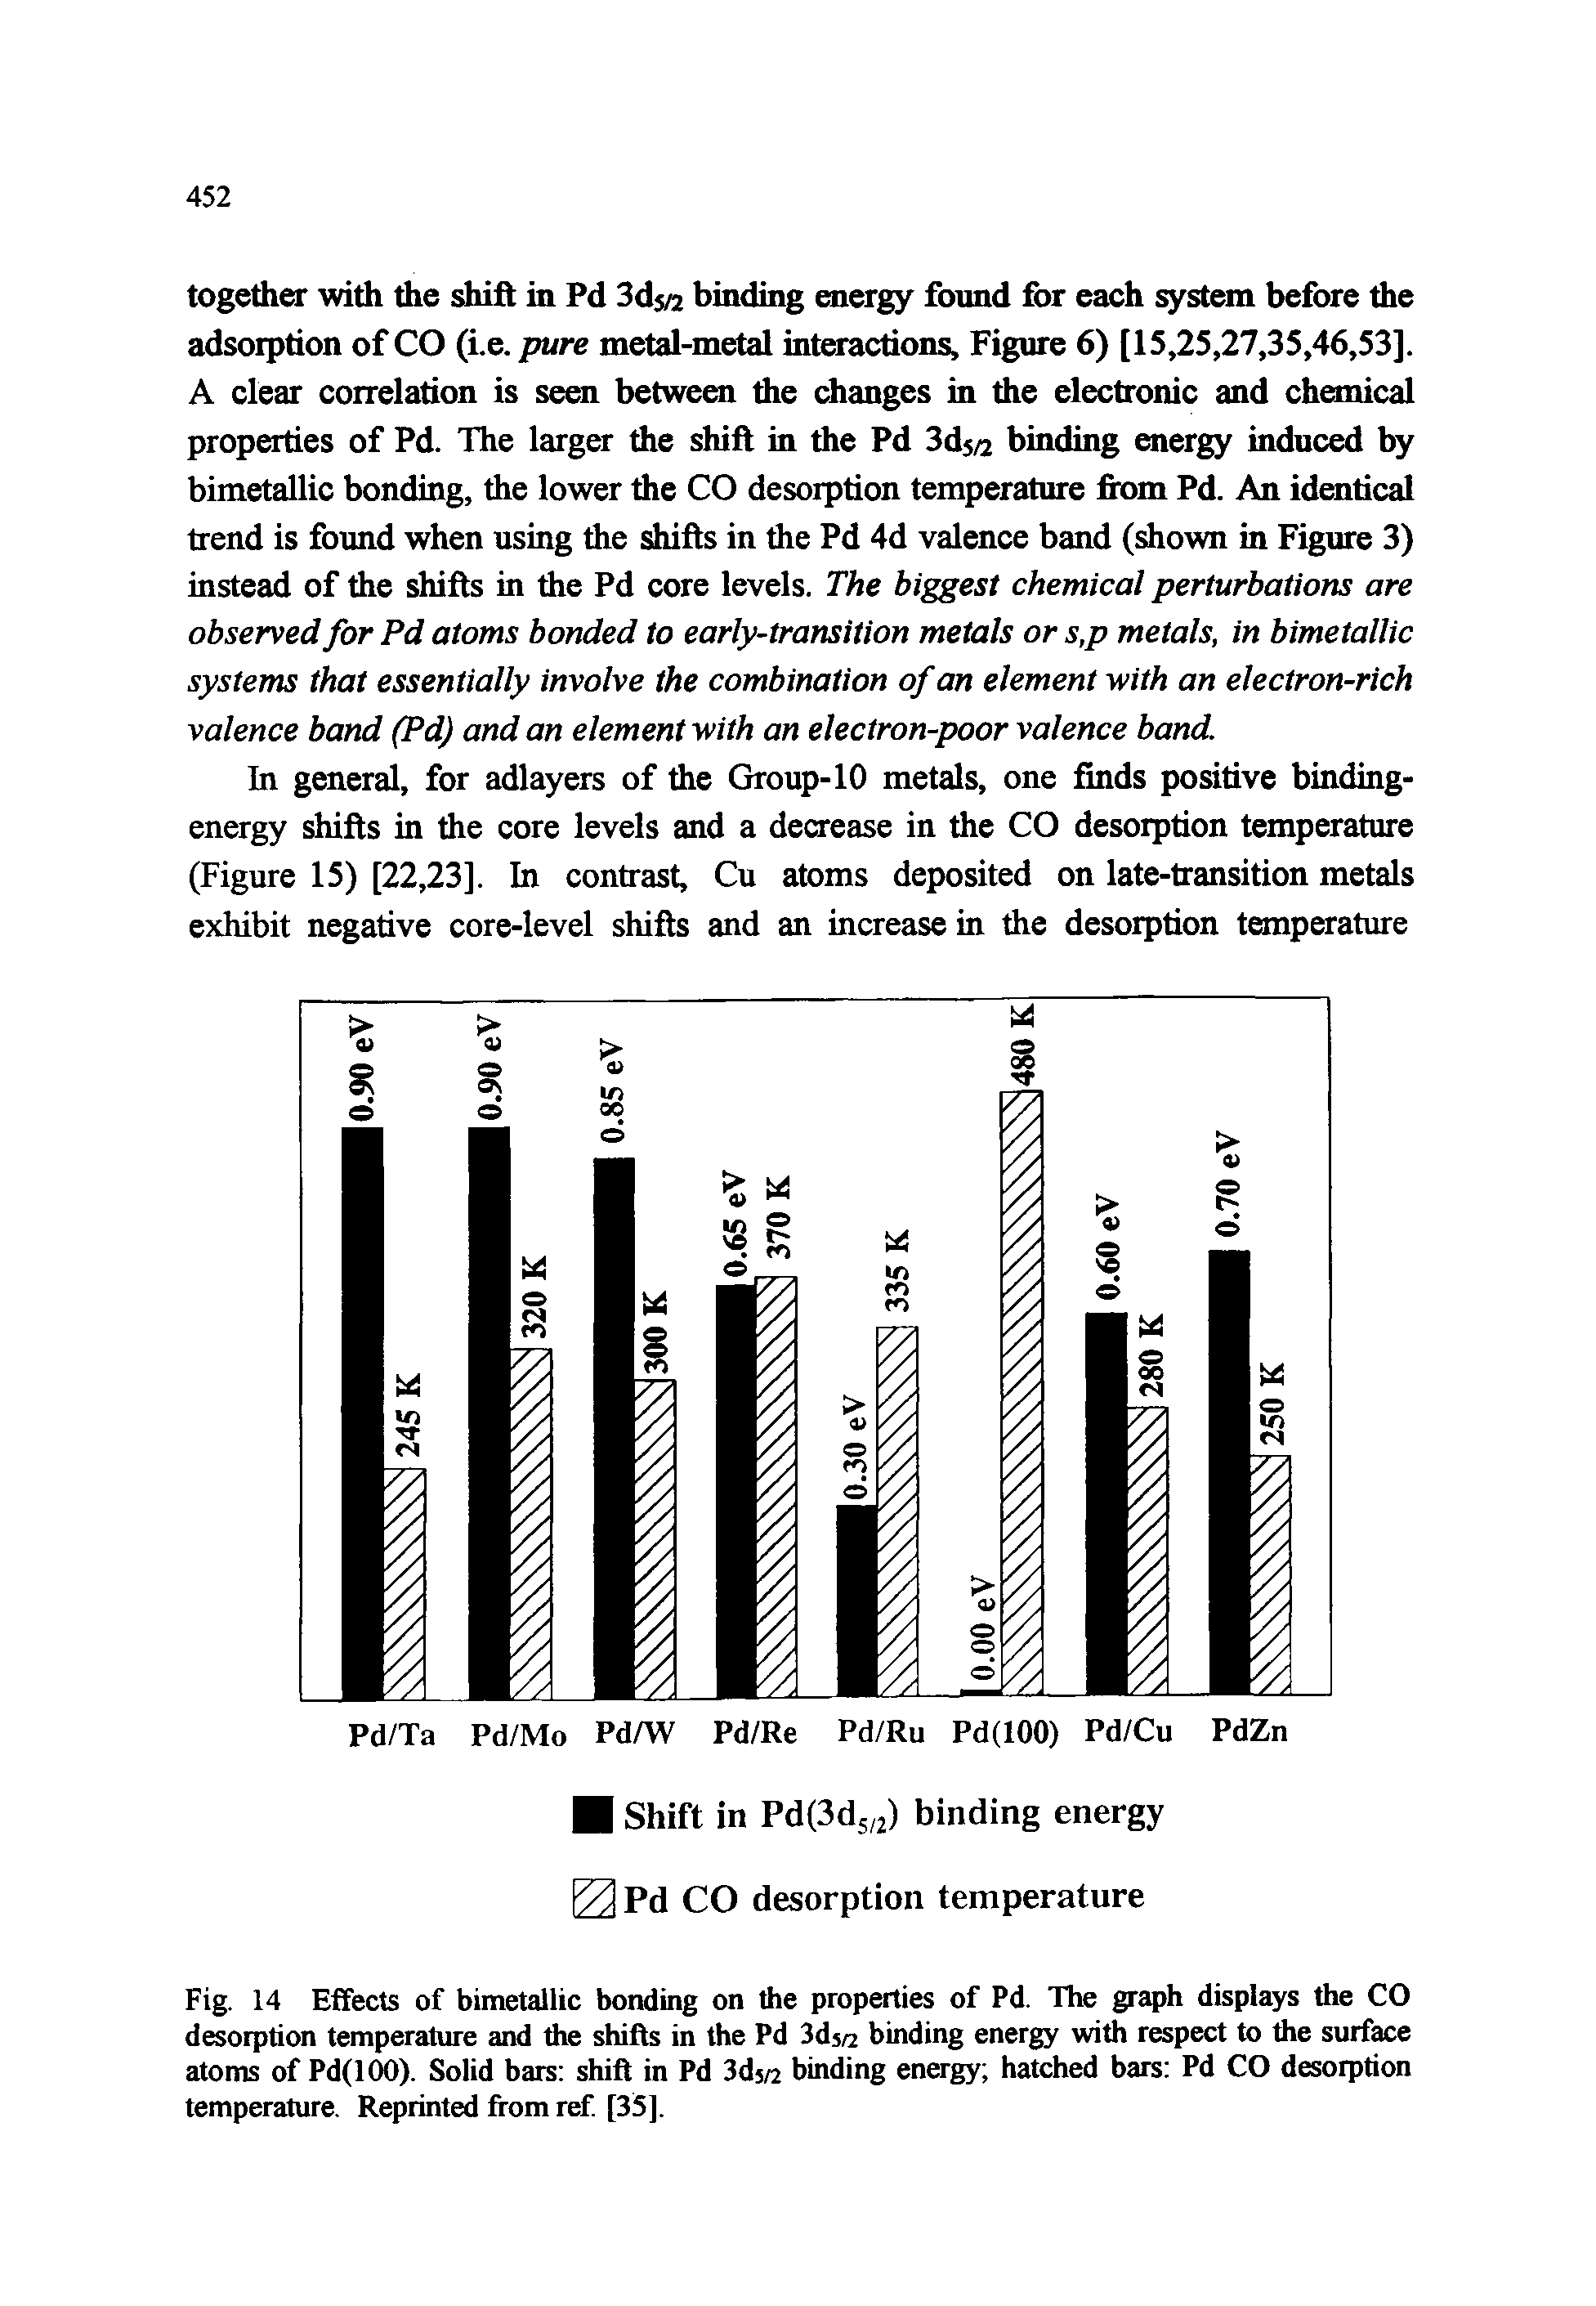 Fig. 14 Effects of bimetallic bonding on the properties of Pd. The graph displays the CO desorption temperature and the shifts in the Pd 3ds/2 binding energy with respect to the surface atoms of Pd(lOO). Solid bars shift in Pd 3ds/2 binding energy hatched bars Pd CO desorption temperature. Reprinted from ref [35].